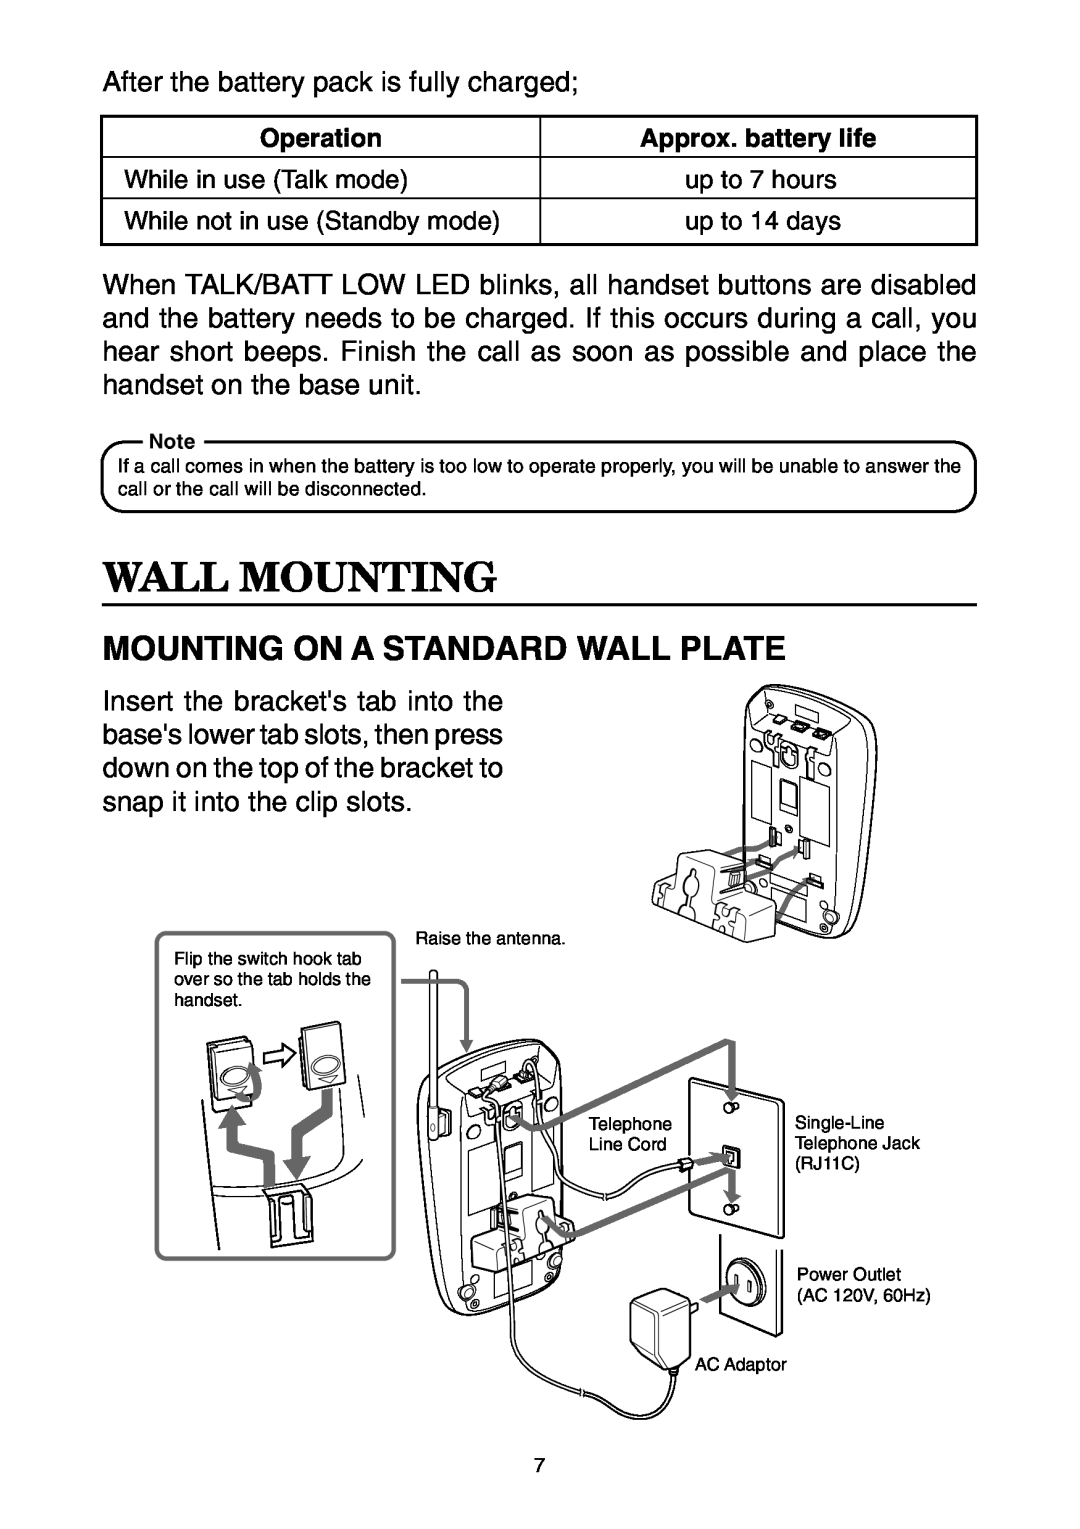 Toshiba FT-8001 AW manual Wall Mounting, Mounting On A Standard Wall Plate 